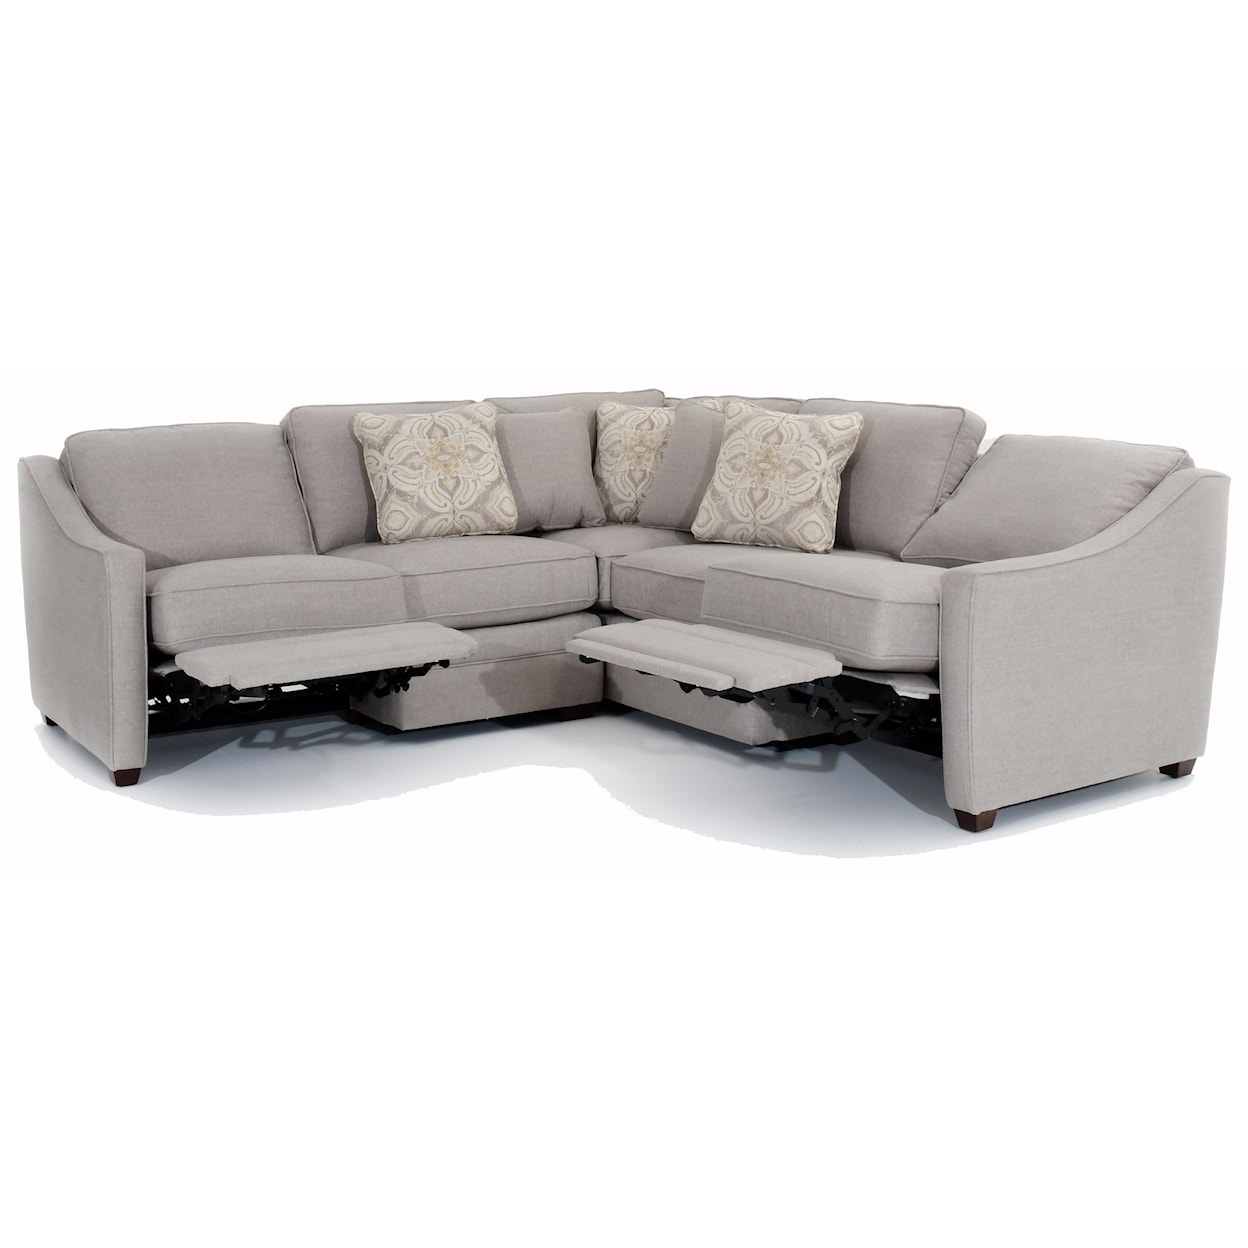 Hickory Craft F9 Series Custom 2 Pc Sectional w/ Recliners